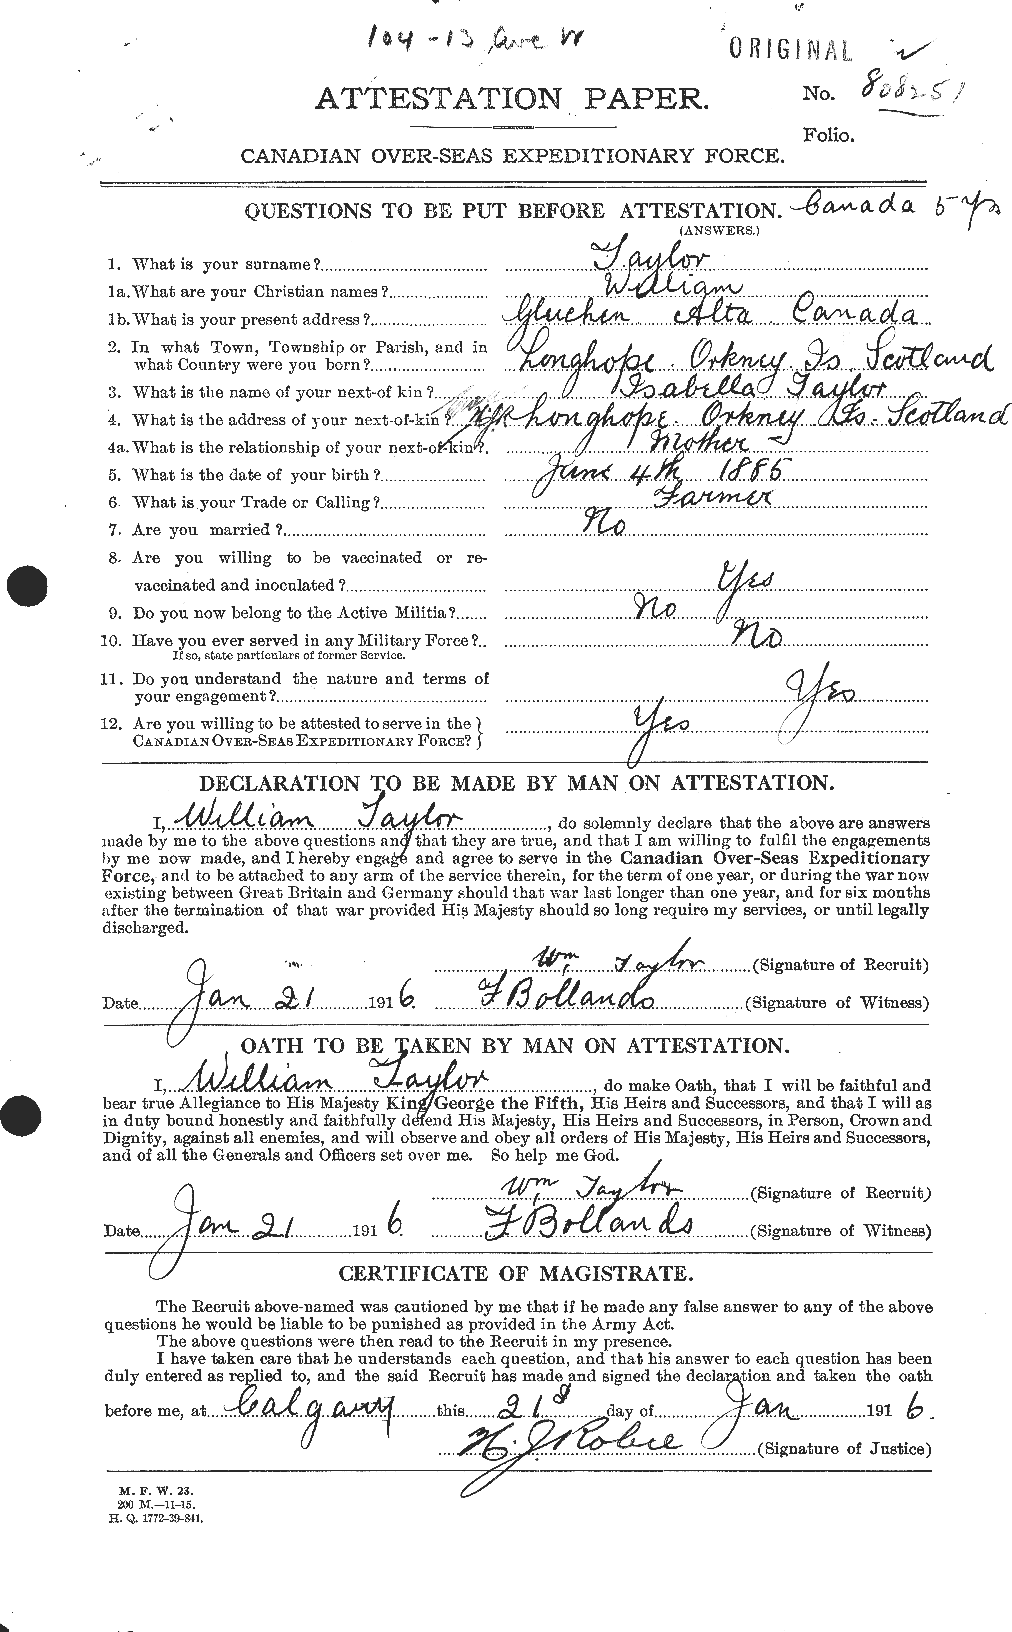 Personnel Records of the First World War - CEF 628184a